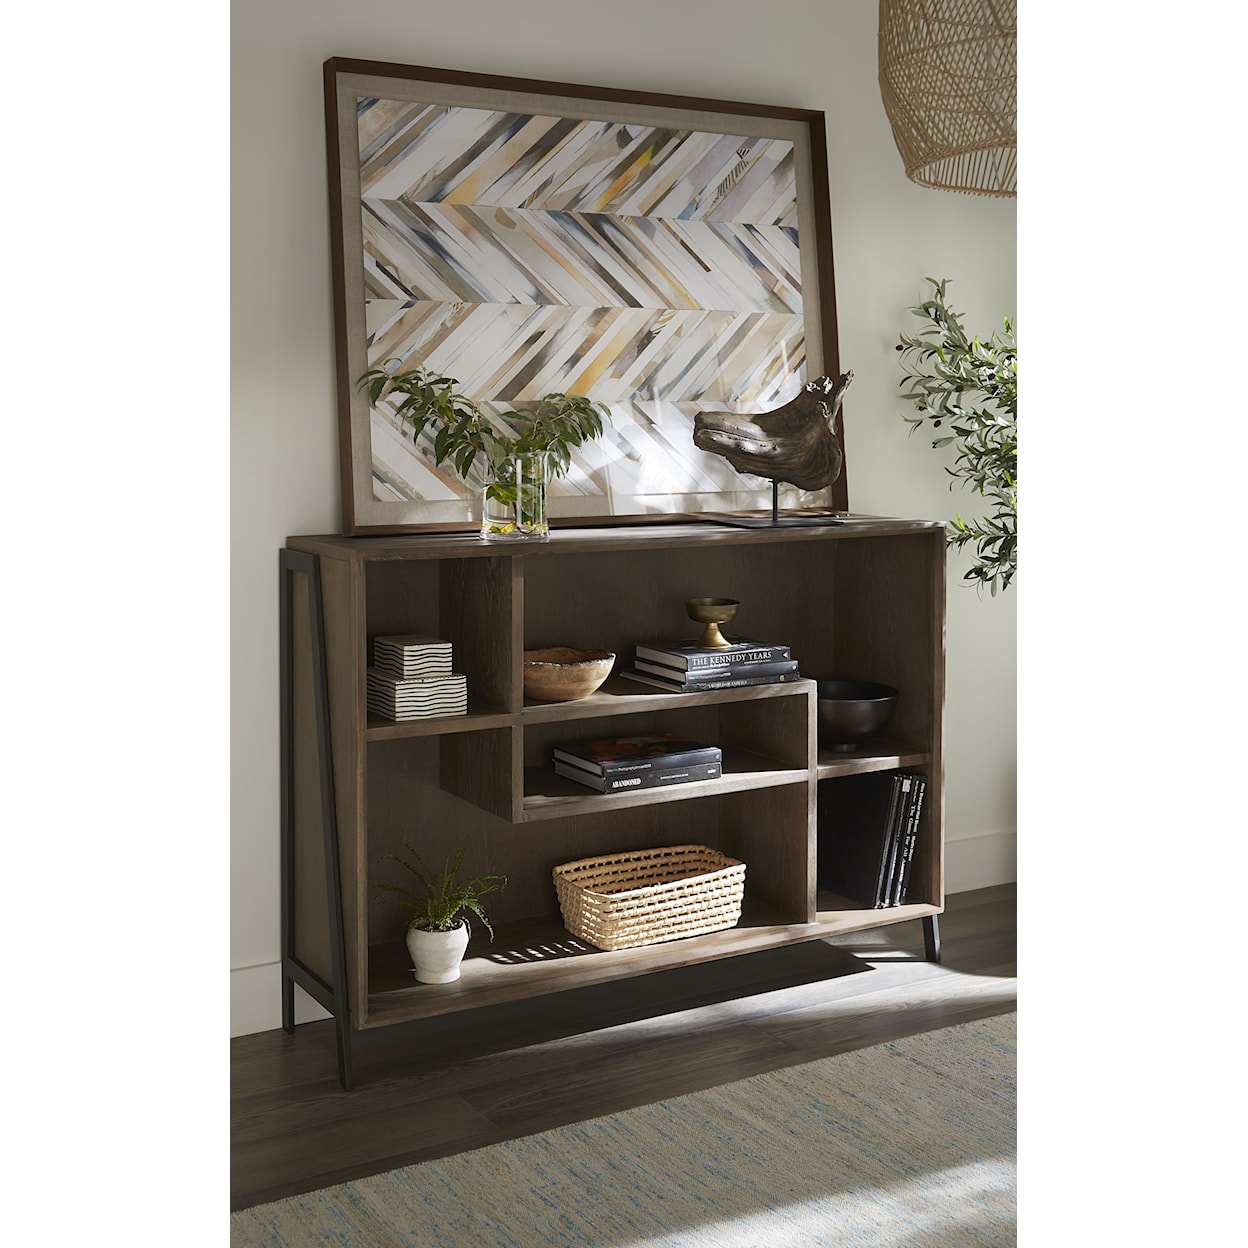 Modus International Finch Wood and Metal Accent Bookcase